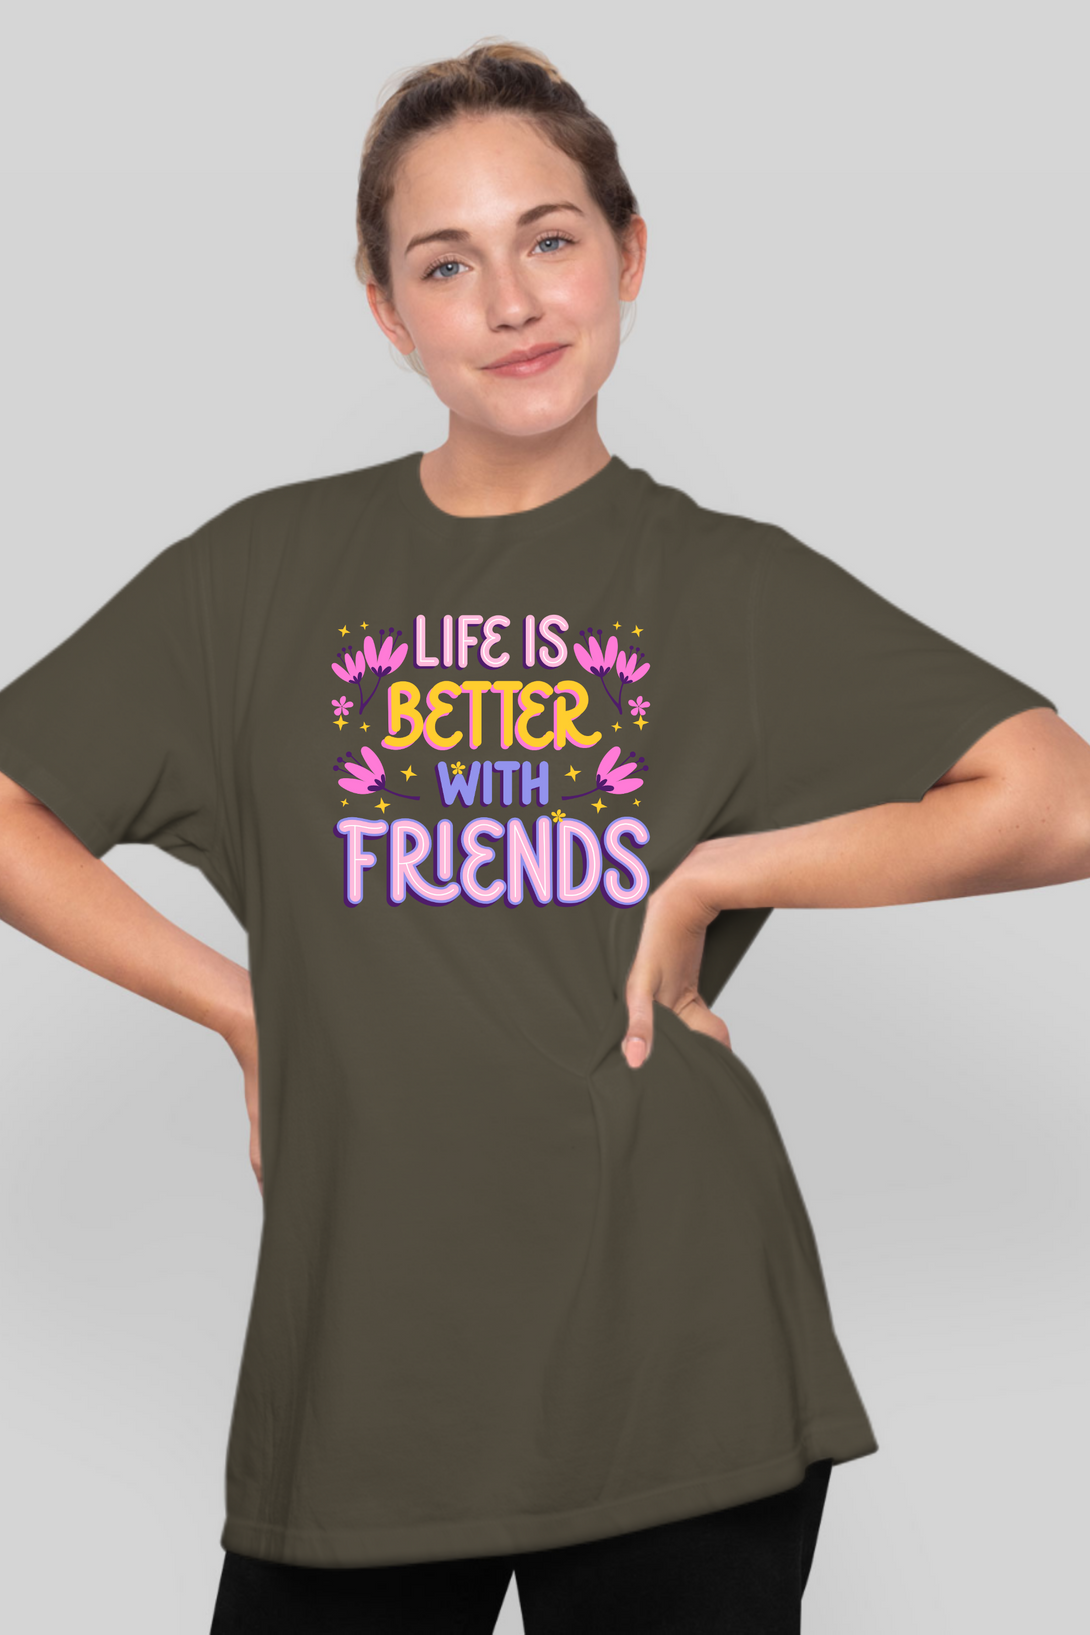 Life Is Better With Friends Printed Oversized T-Shirt For Women - WowWaves - 7